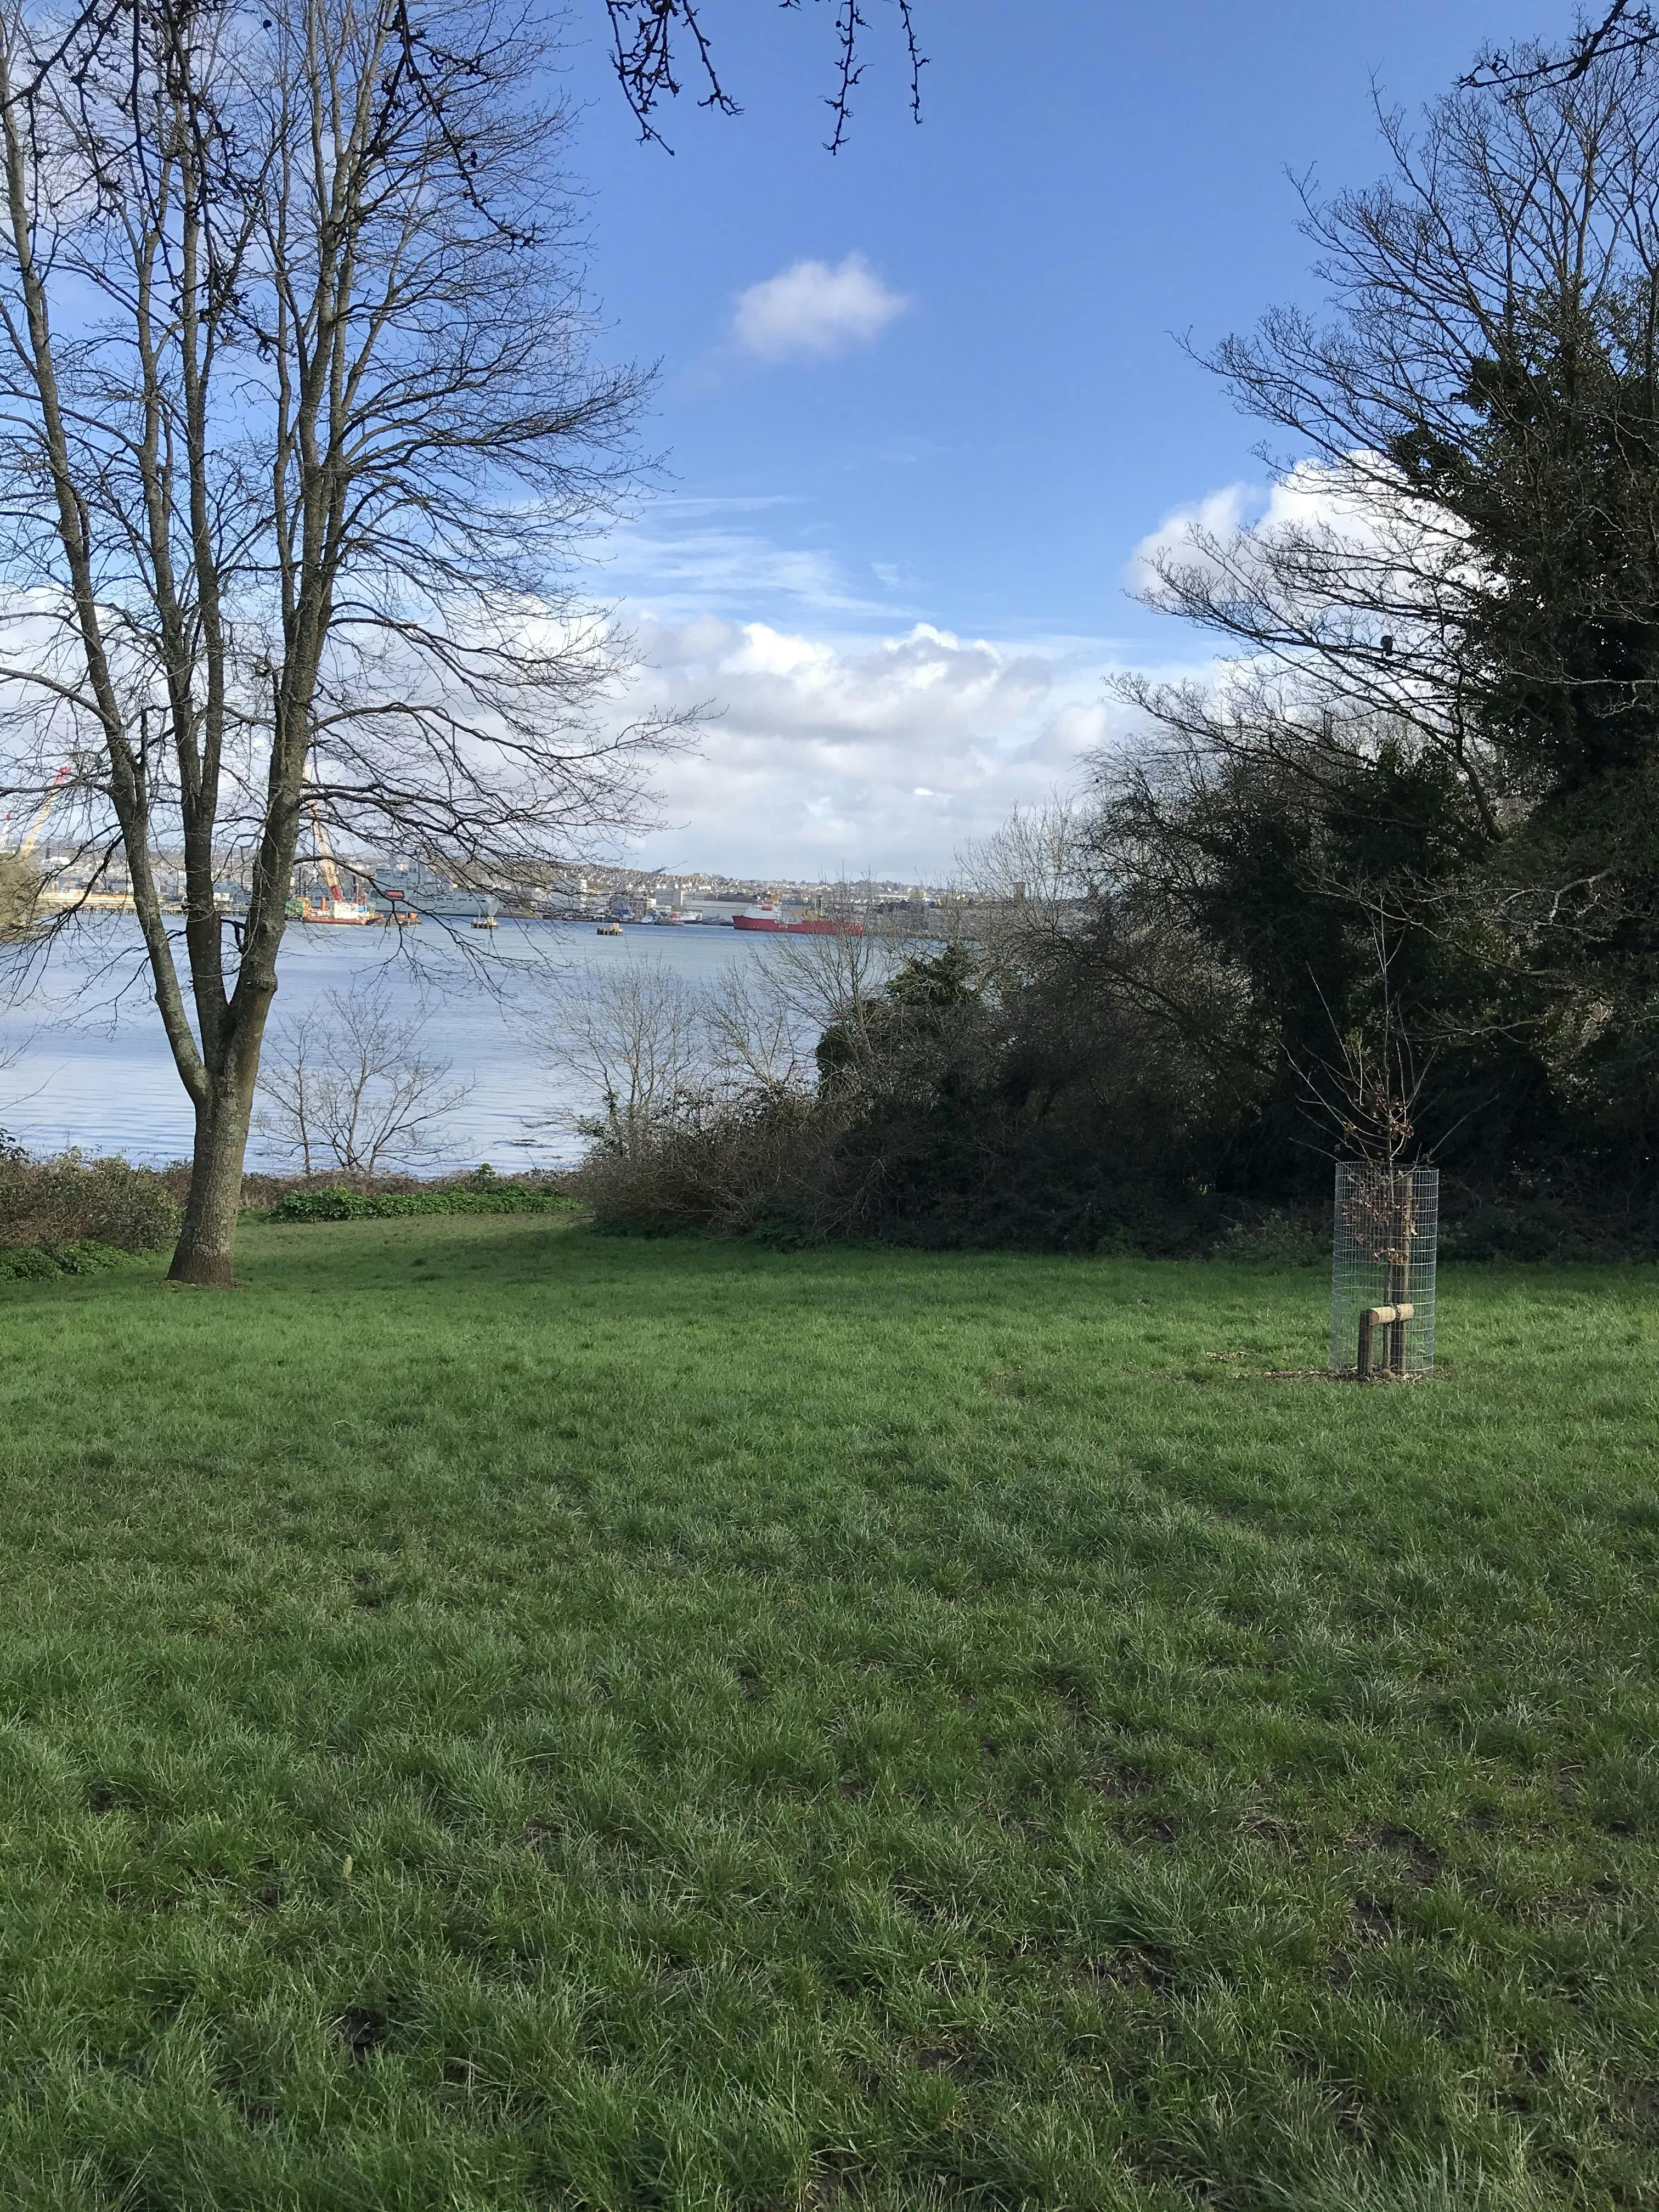 Torpoint-Thanckes Park - Trees Planted in February 2020